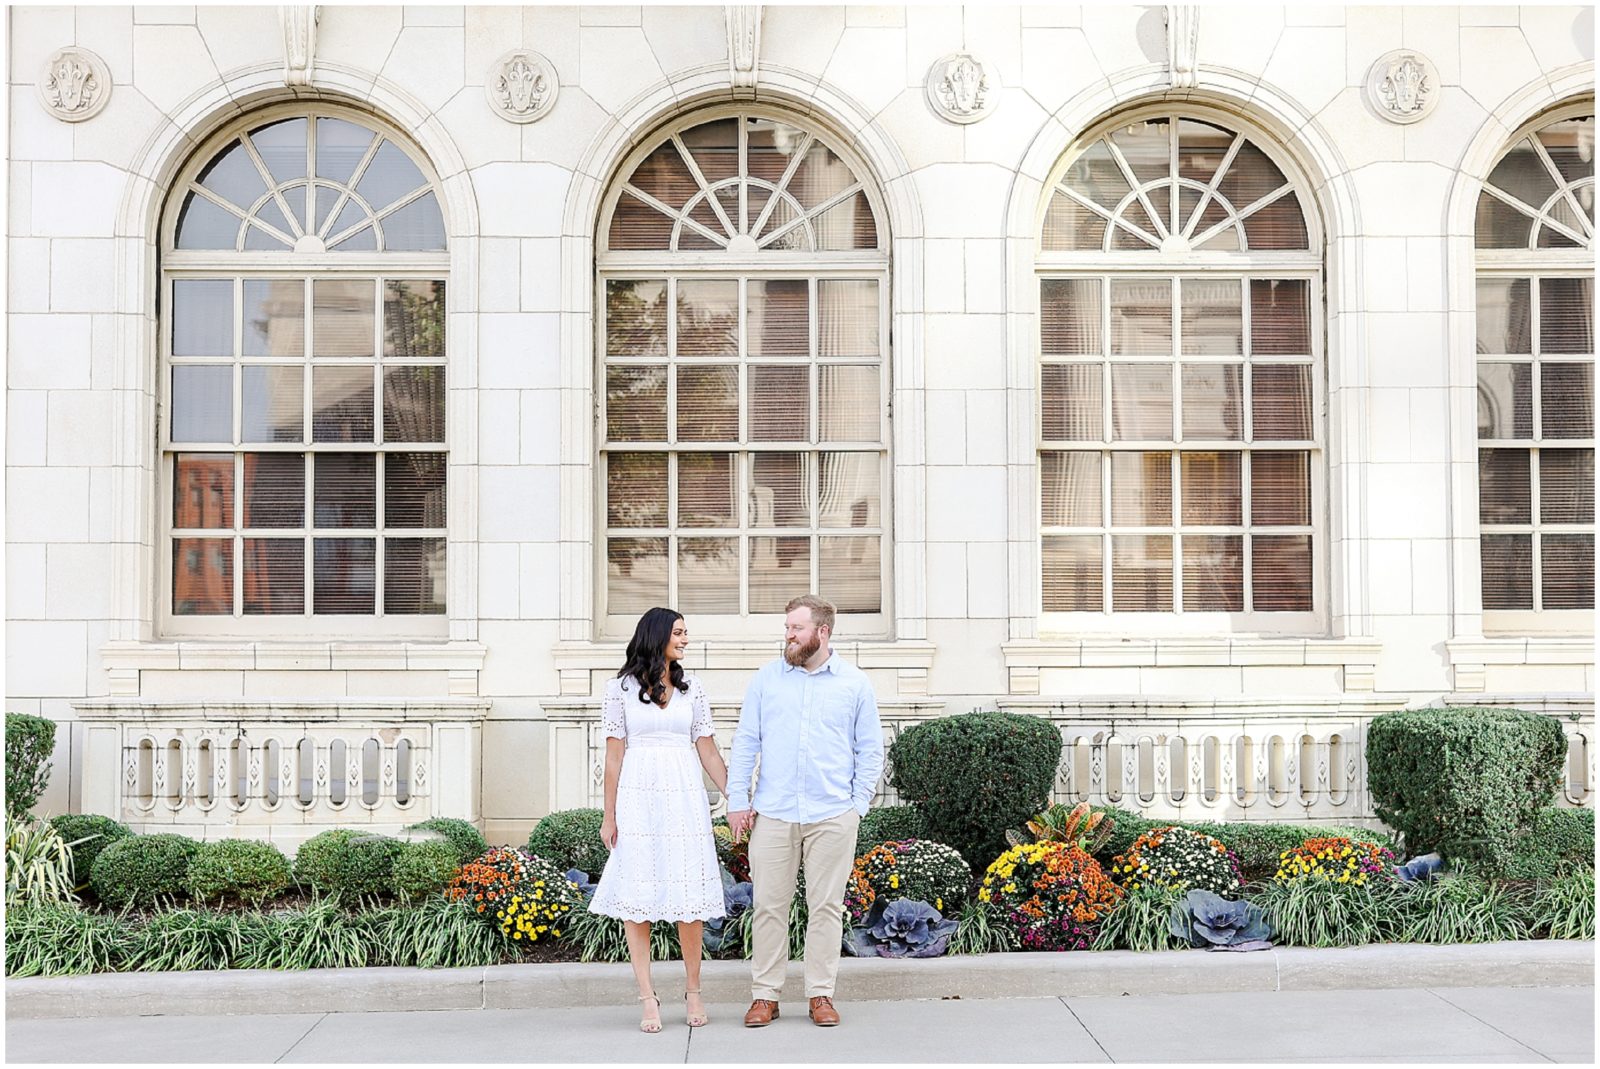 Kansas City Engagement Session Location Ideas & What to Wear to Your Engagement Session | Mariam Saifan Photography | KC Wedding Photographer